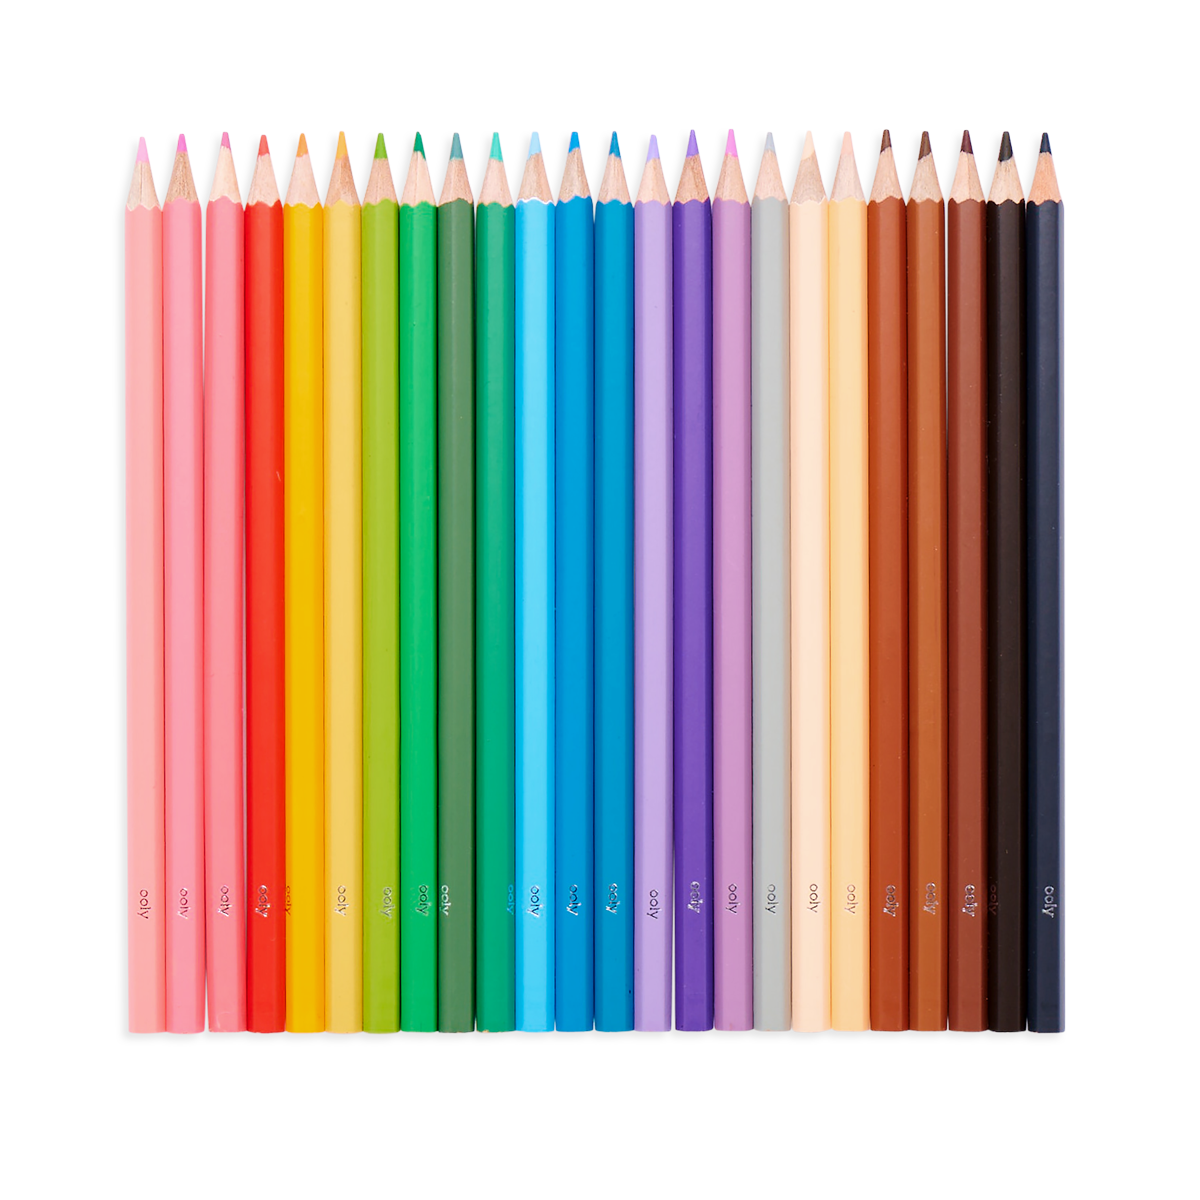 Ooly Draw N' Doodle Mini Colored Pencils Set Space